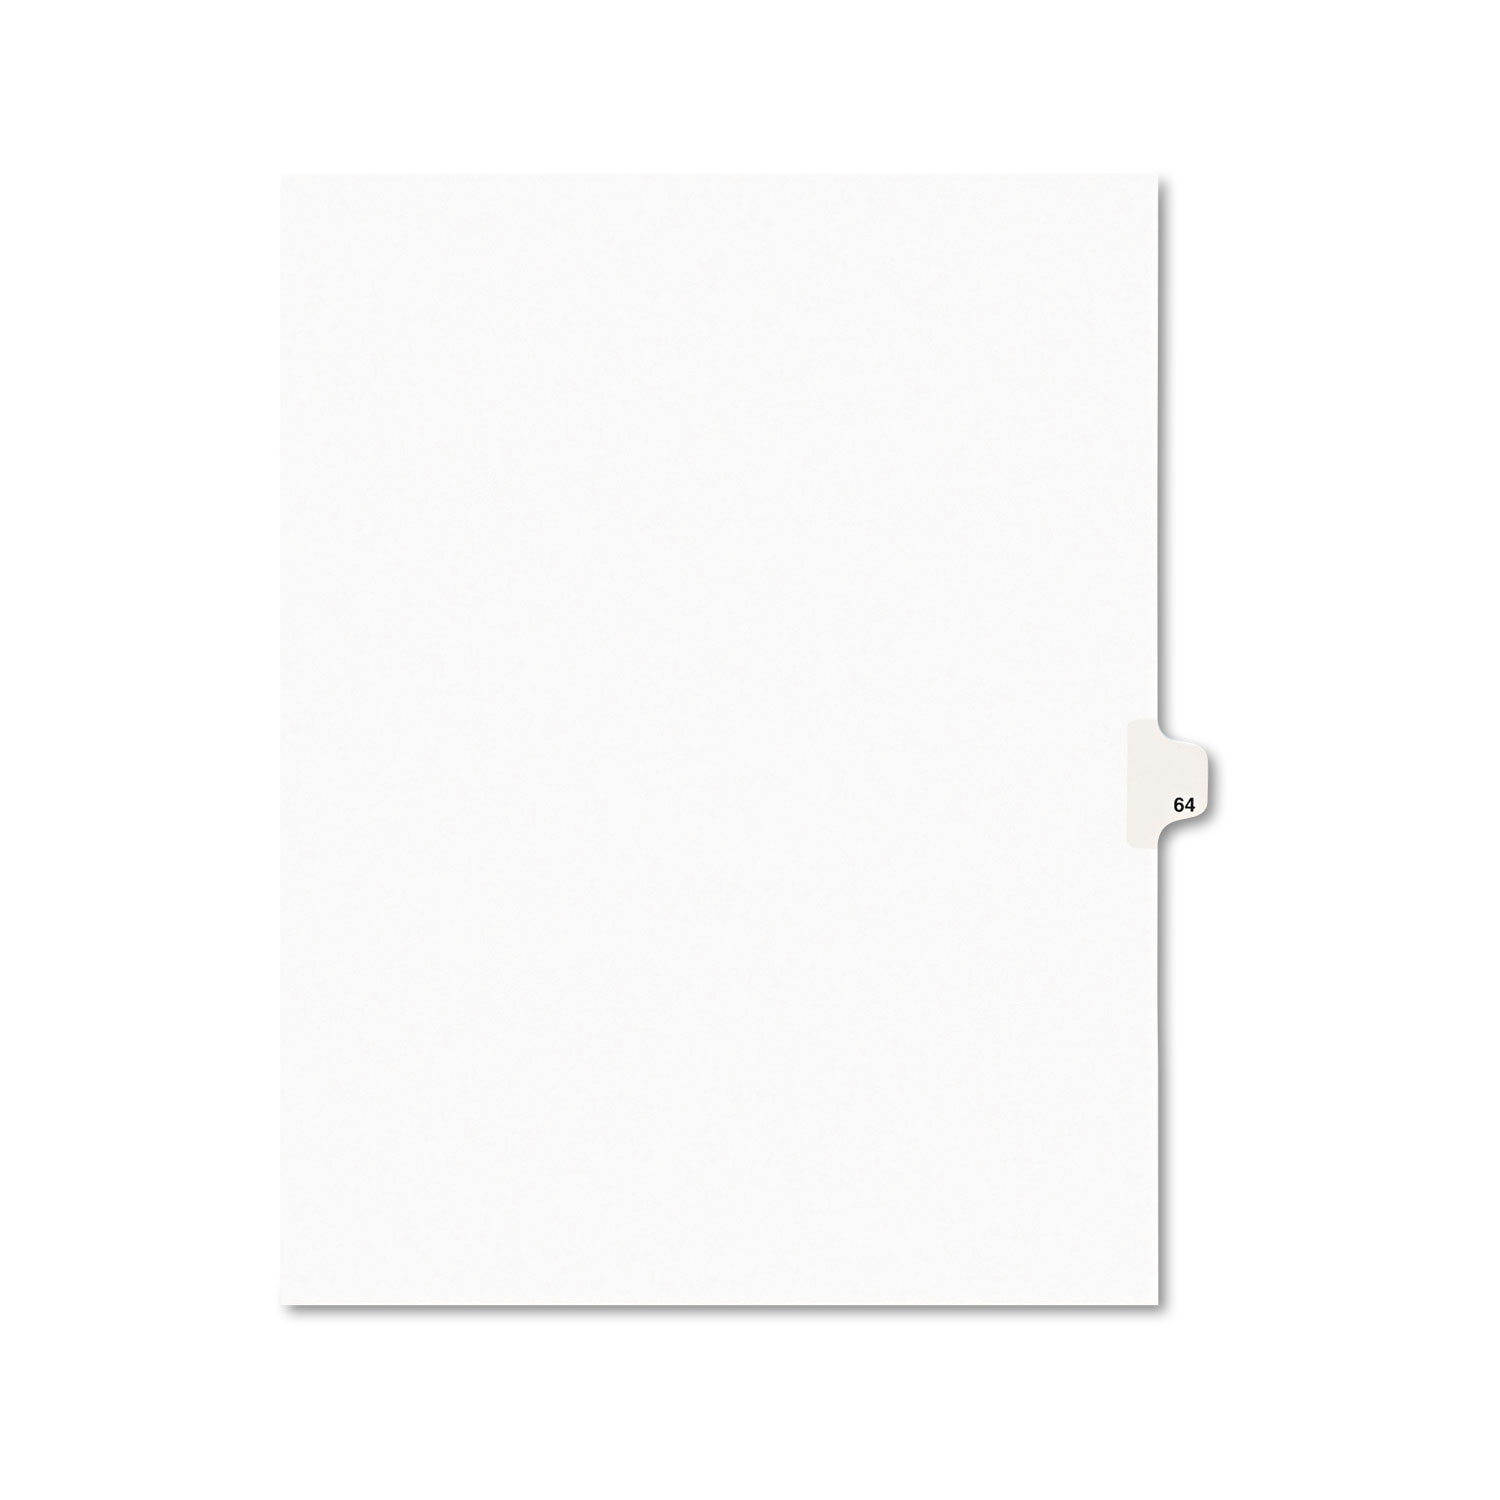  Avery 01064 Preprinted Legal Exhibit Side Tab Index Dividers, Avery Style, 10-Tab, 64, 11 x 8.5, White, 25/Pack (AVE01064) 